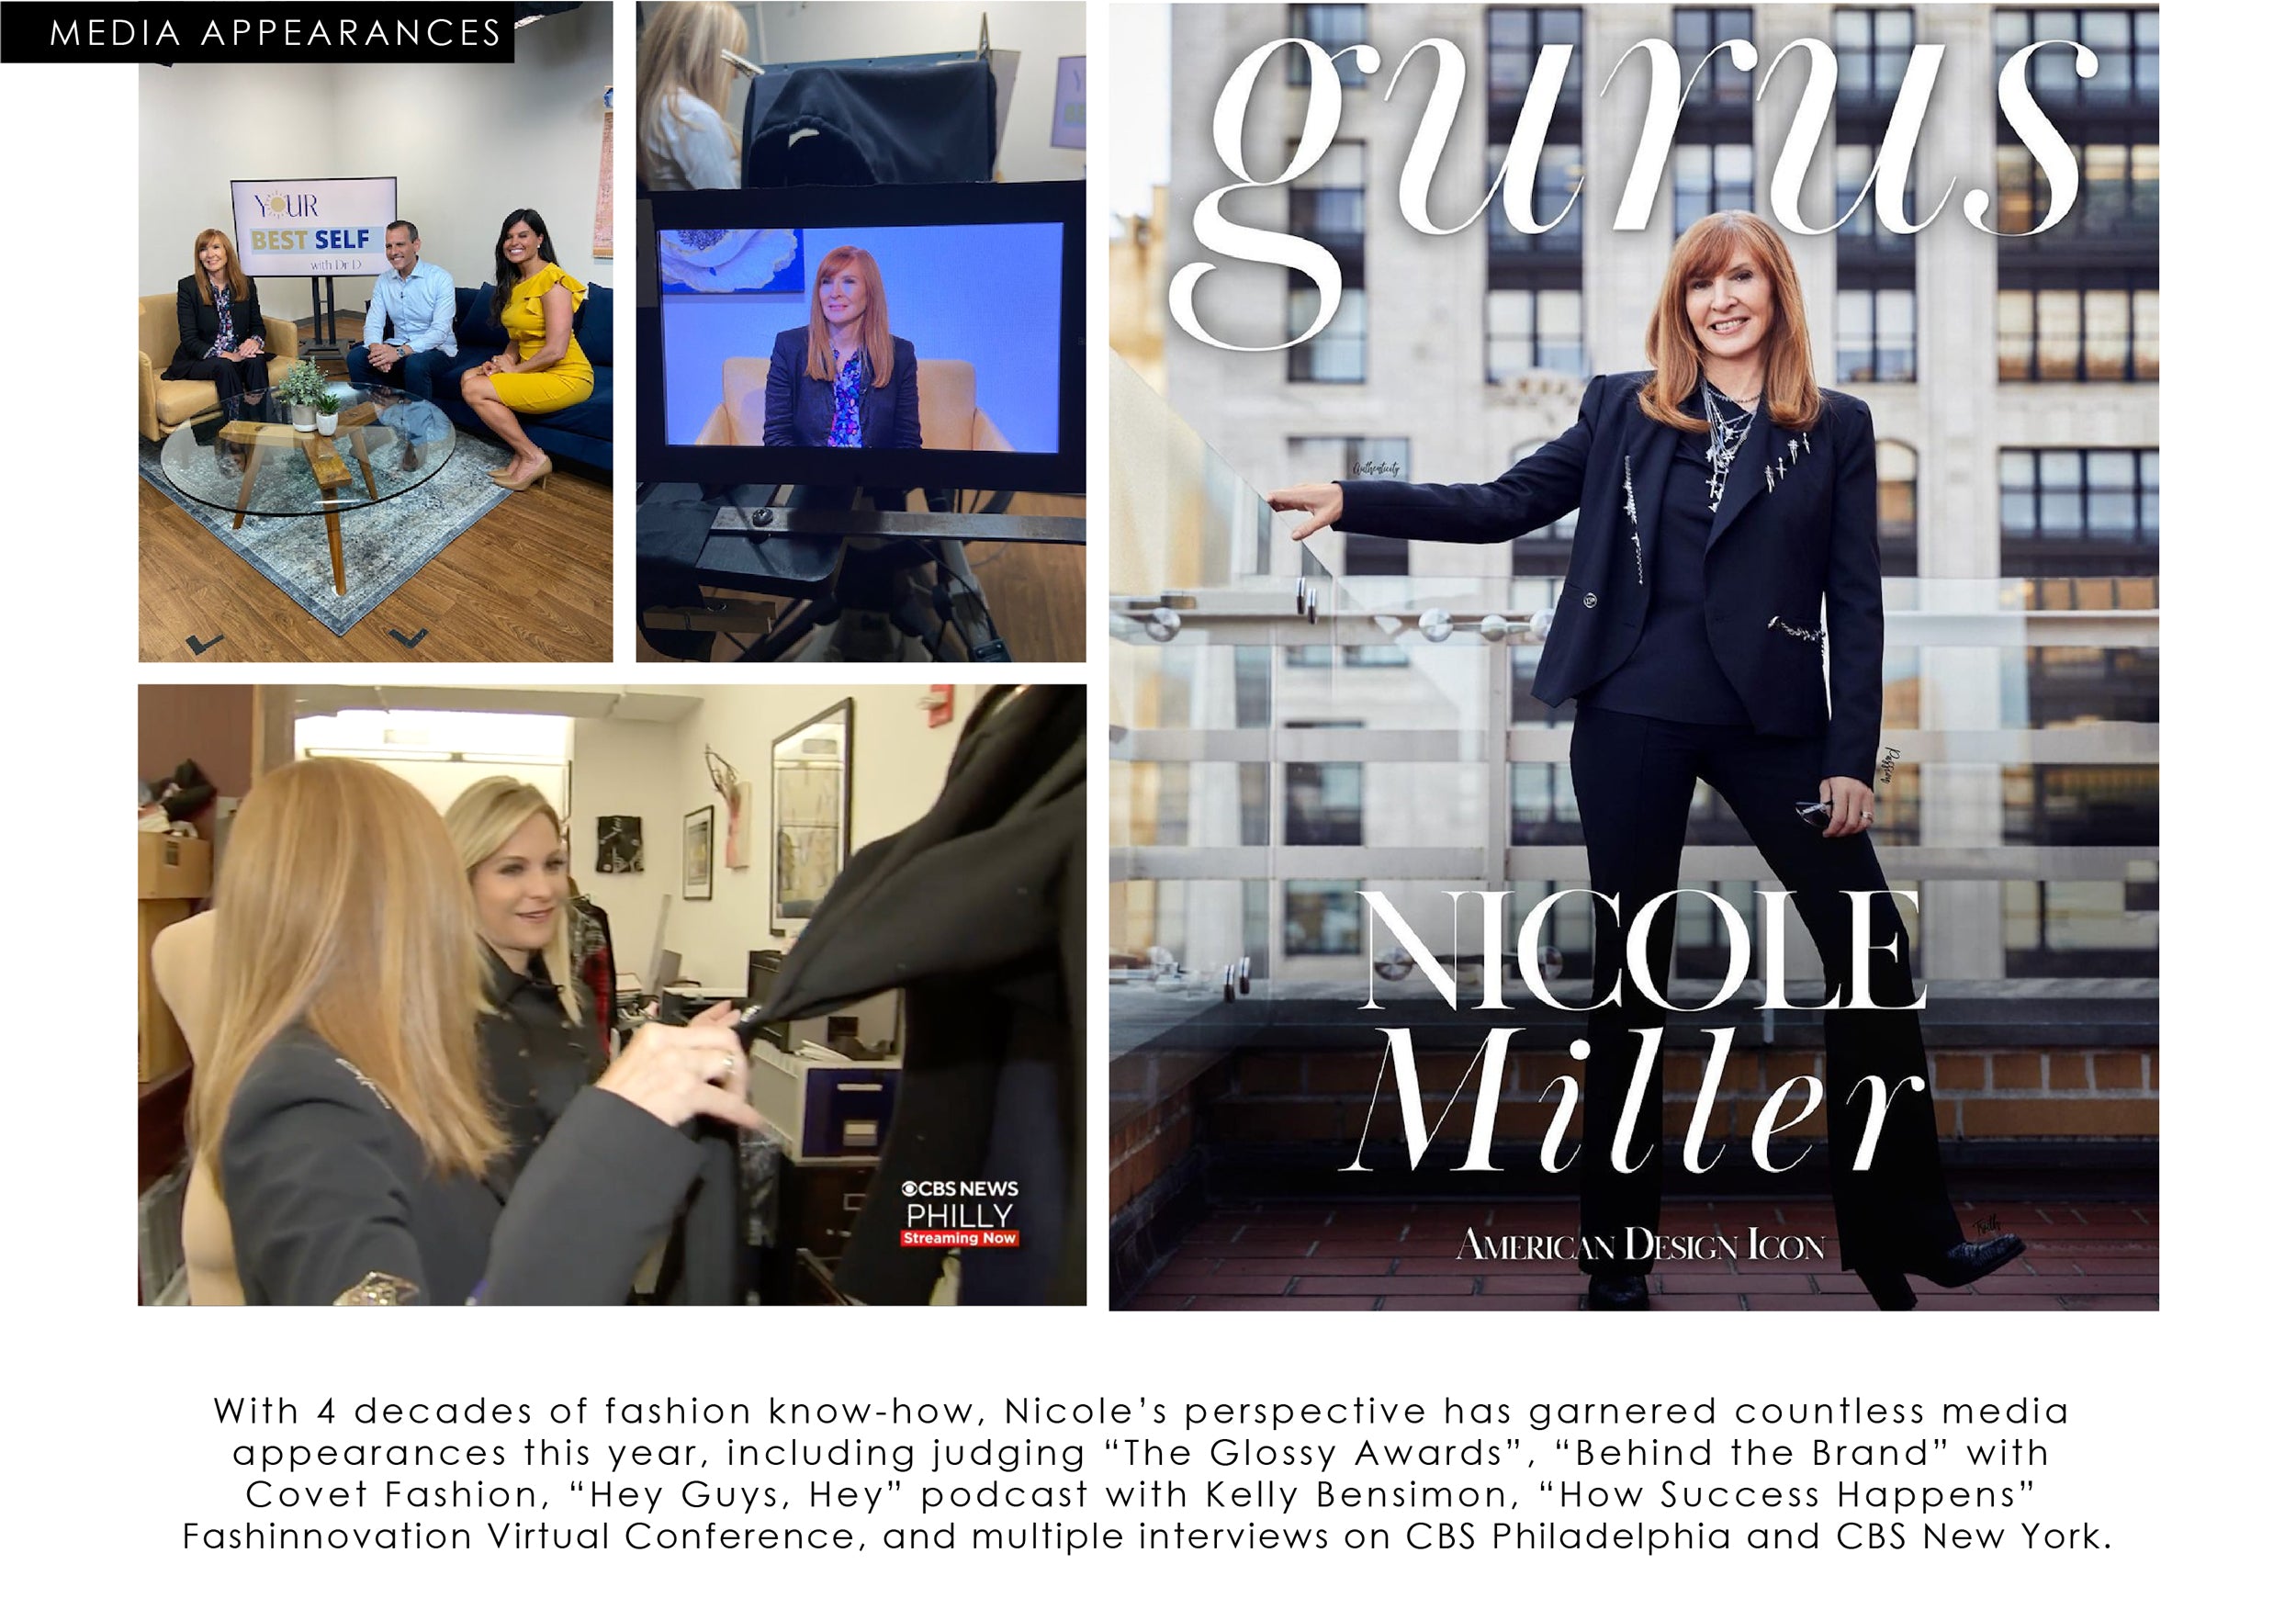 Media appearances, with 4 decades of fashion know-how, Nicole's perspective has garnered countless media appearances this year, including judging 